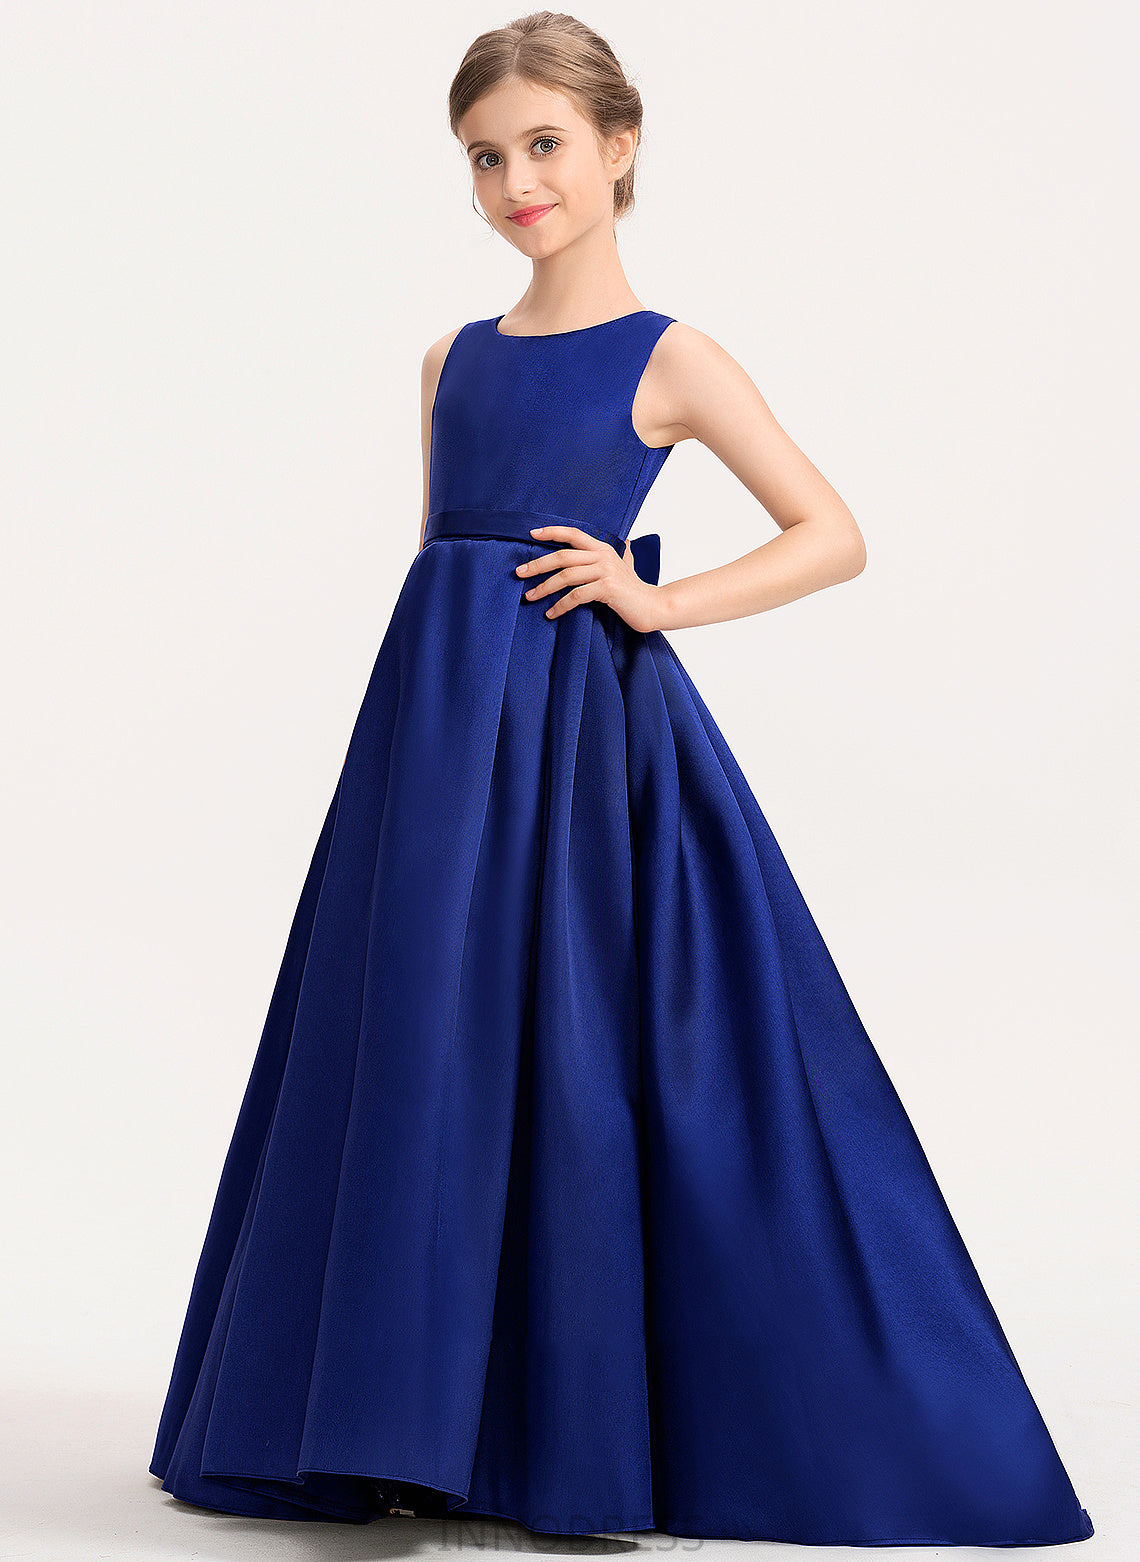 Sweep Diana With Bow(s) Satin Train Scoop Junior Bridesmaid Dresses Neck Ball-Gown/Princess